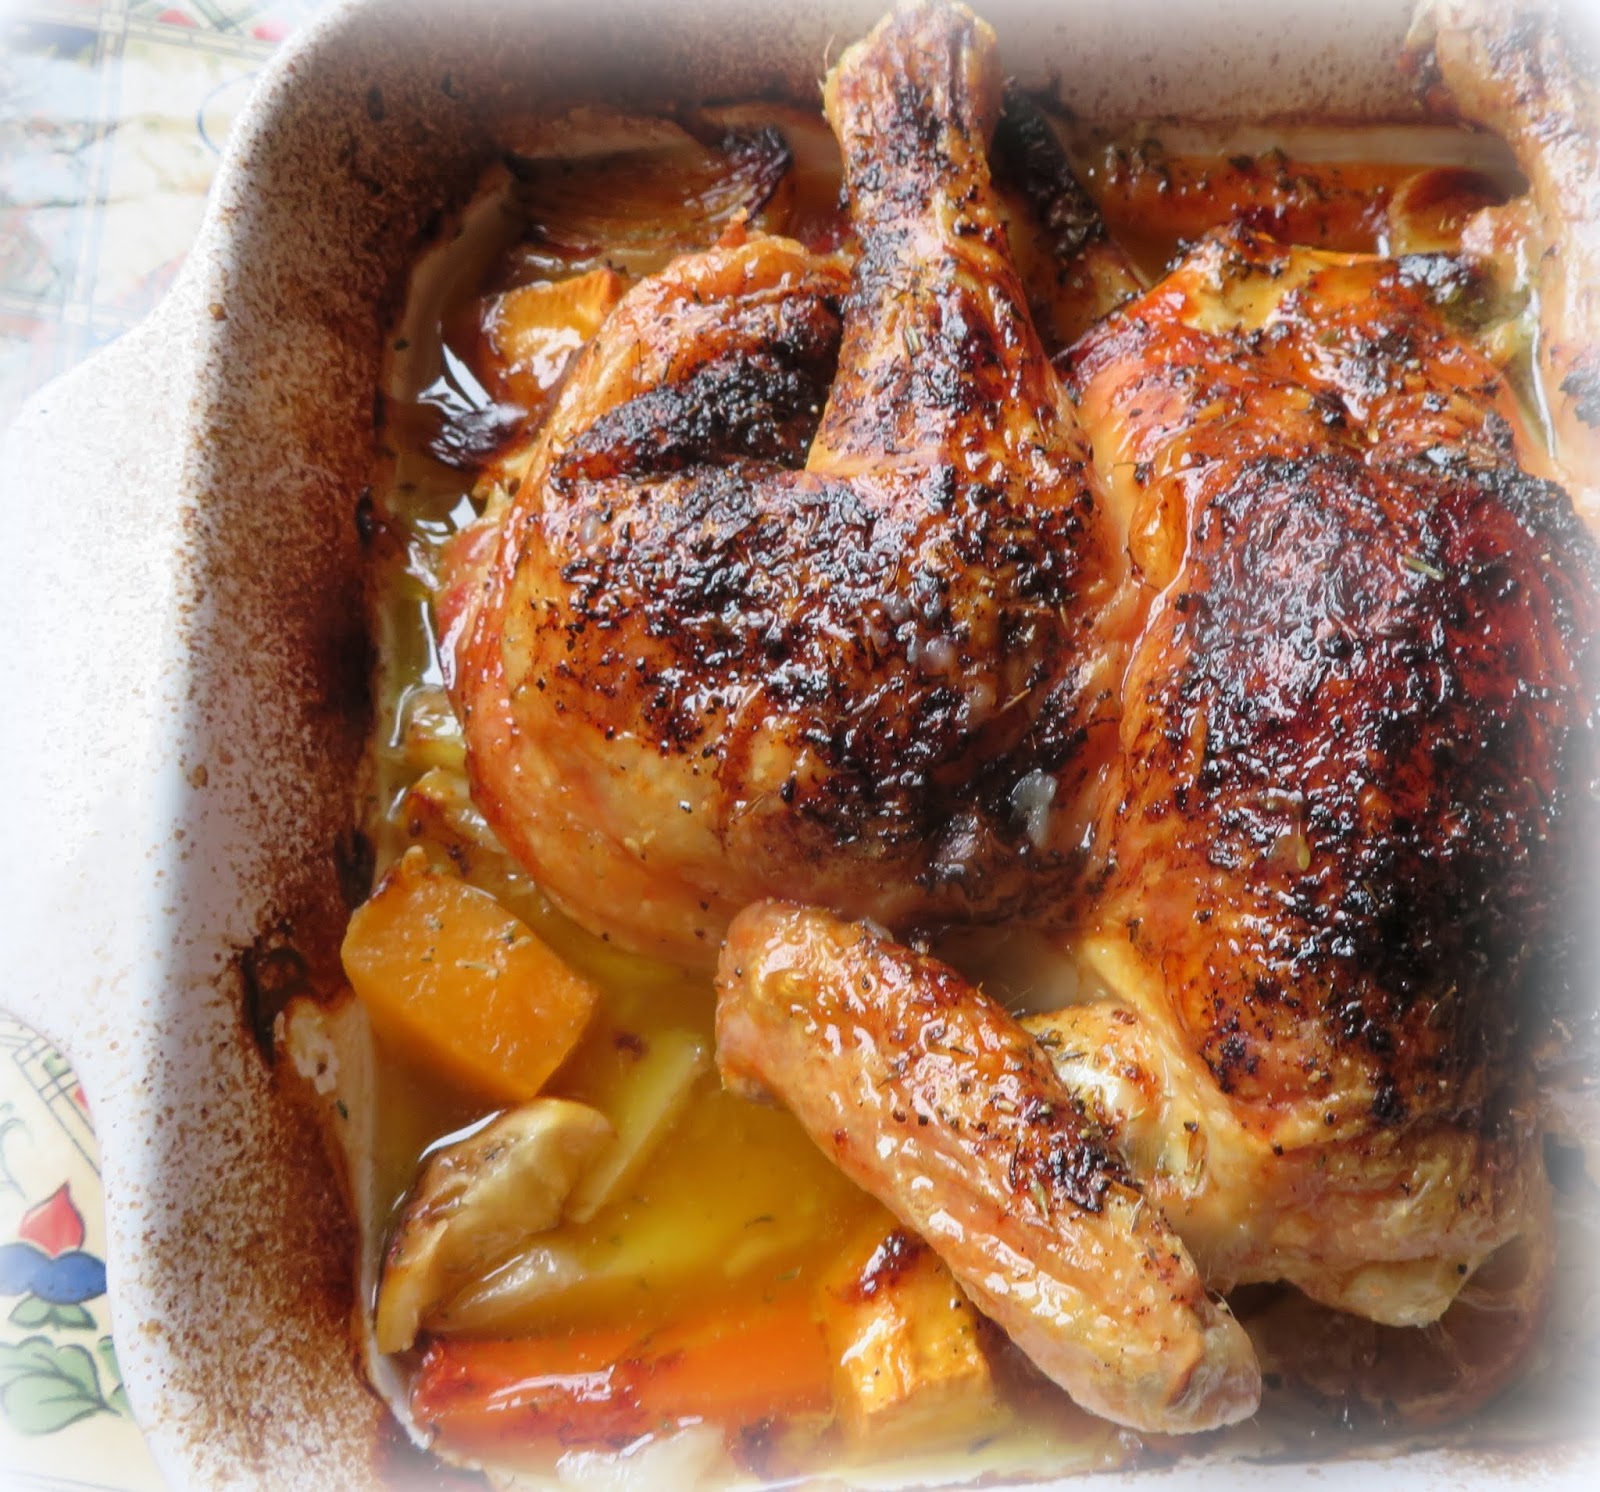 The English Kitchen: Another Roast Chicken